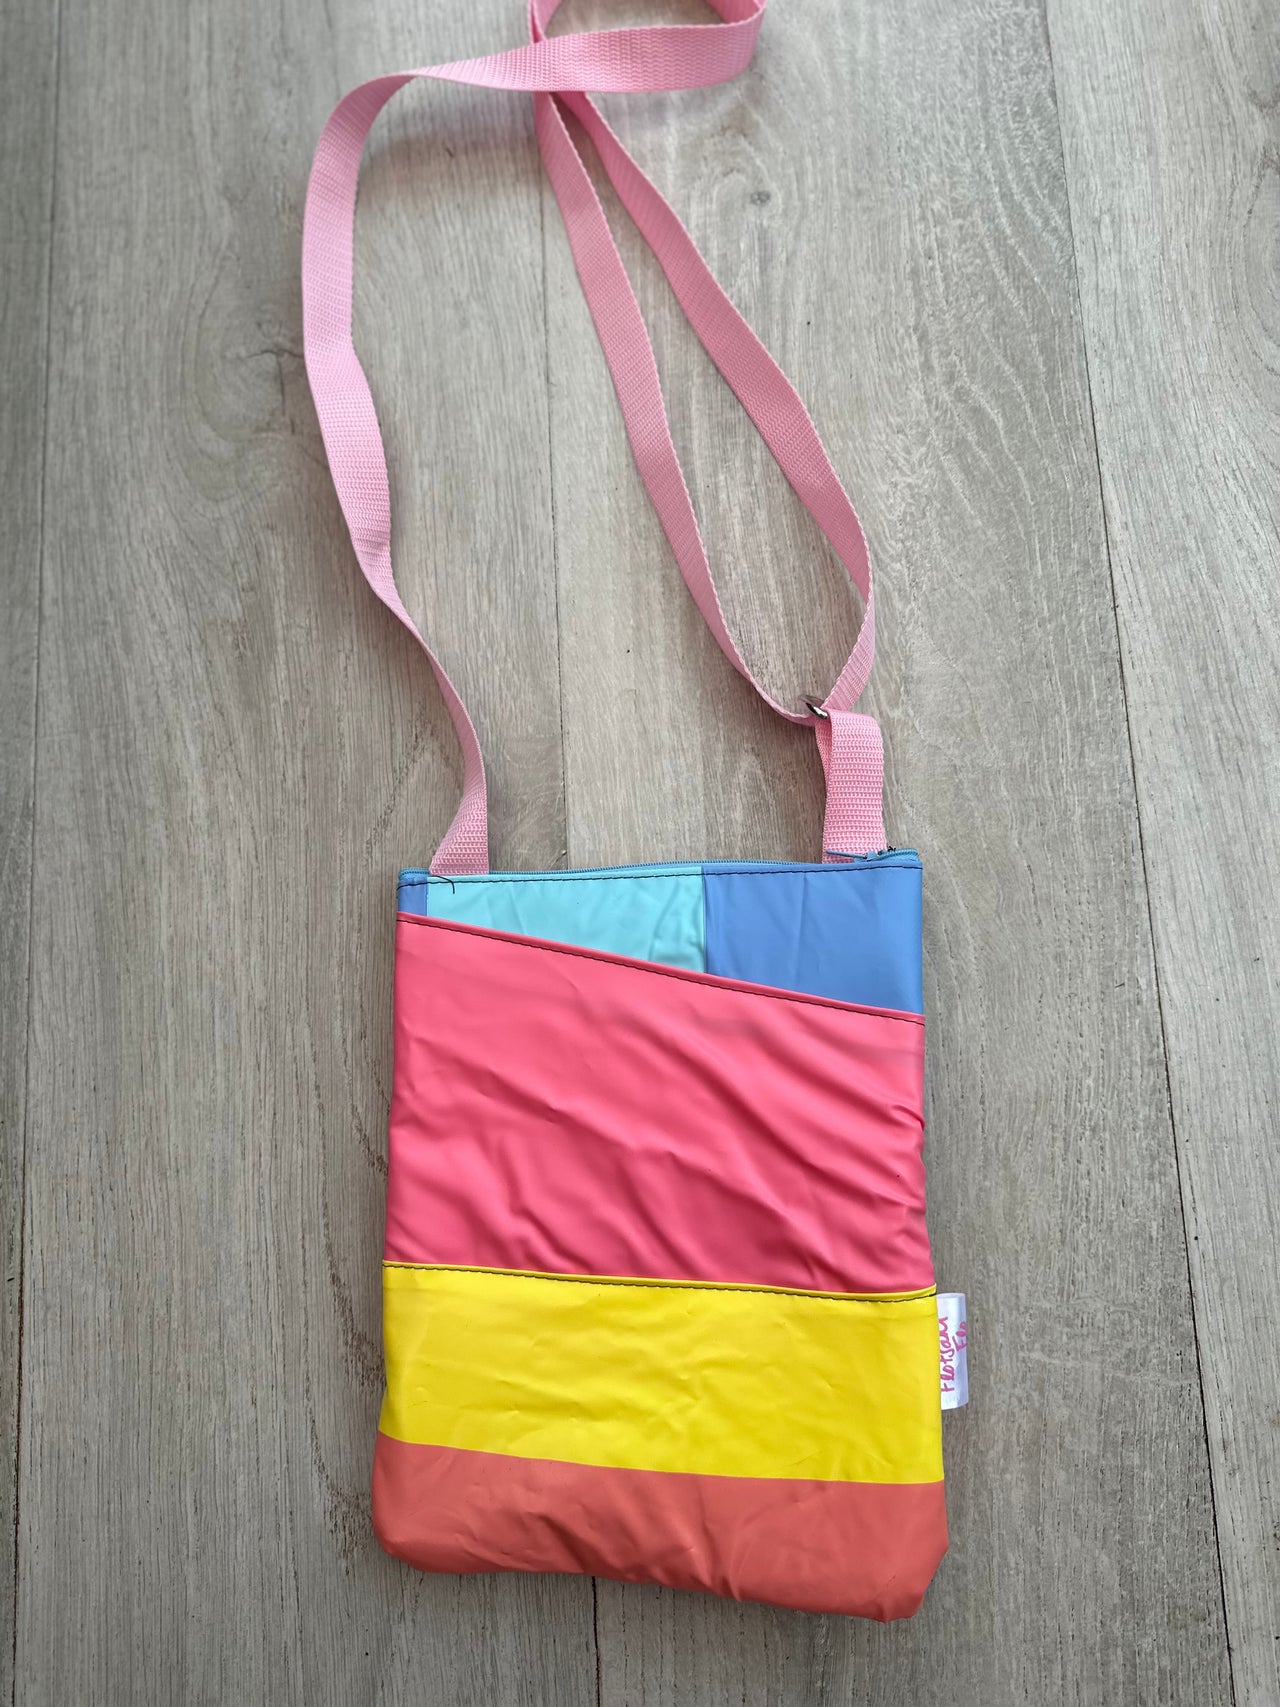 I used to be a Banner and Inflatable - Upcycled Rainbow colour Cross Body Bag